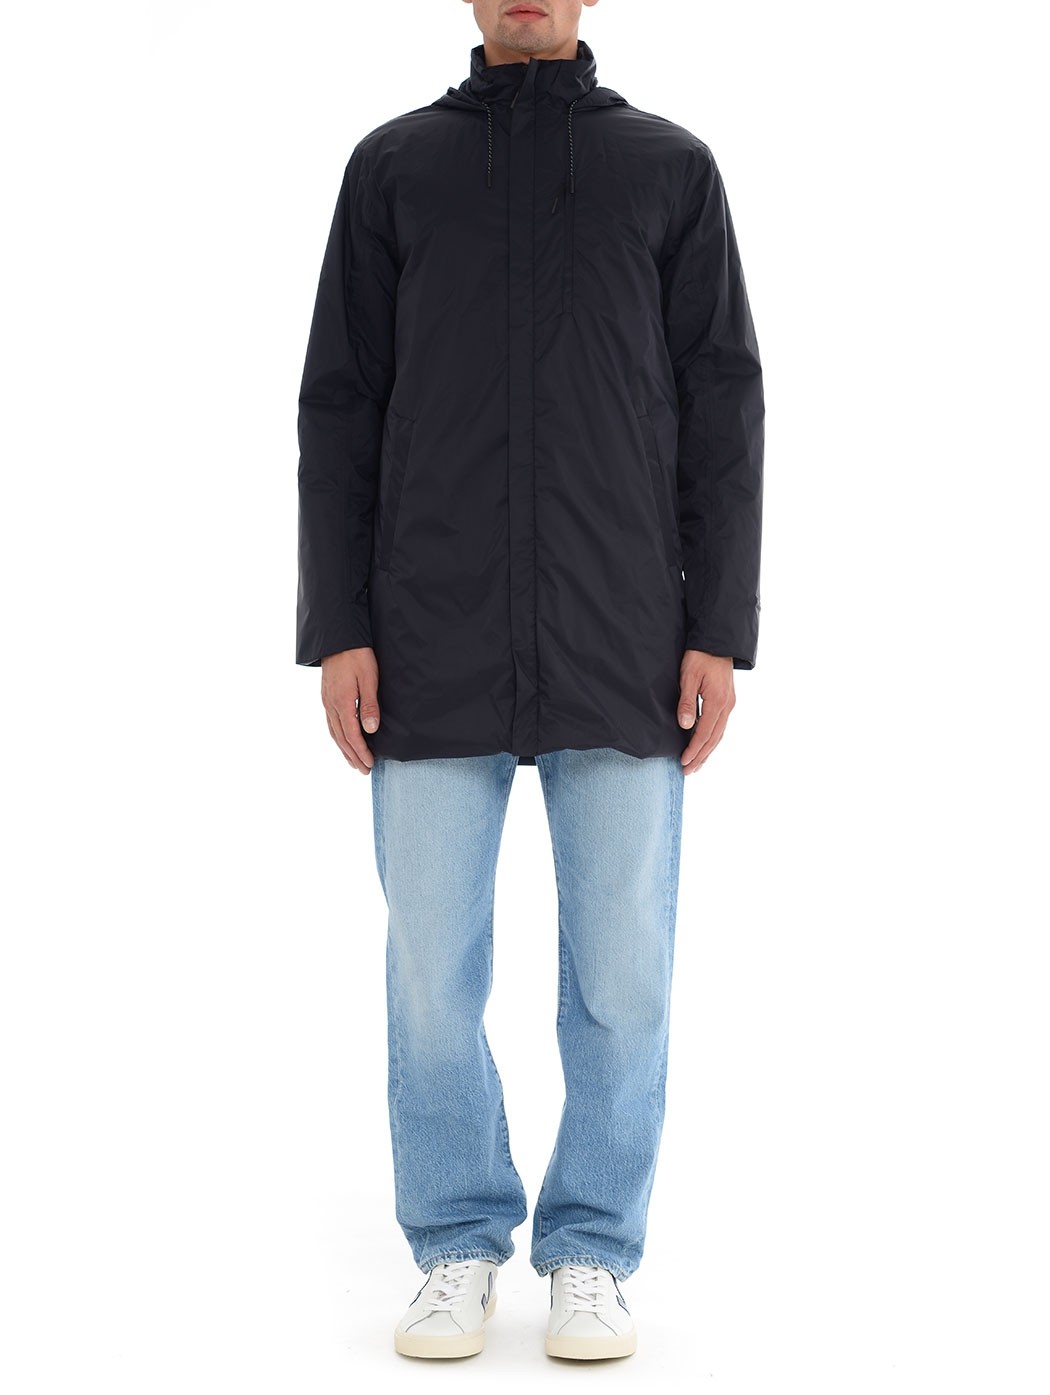  MAN COLLECTION,FALL WINTER,CHURCH'S,MONCLER,MONCLER GRENOBLE,HERNO,WOOLRICH,MSGM,NEIL BARRETT,STONE ISLAND,BLUNDSTONE  RAINS A-PADDED-NYLON-COAT